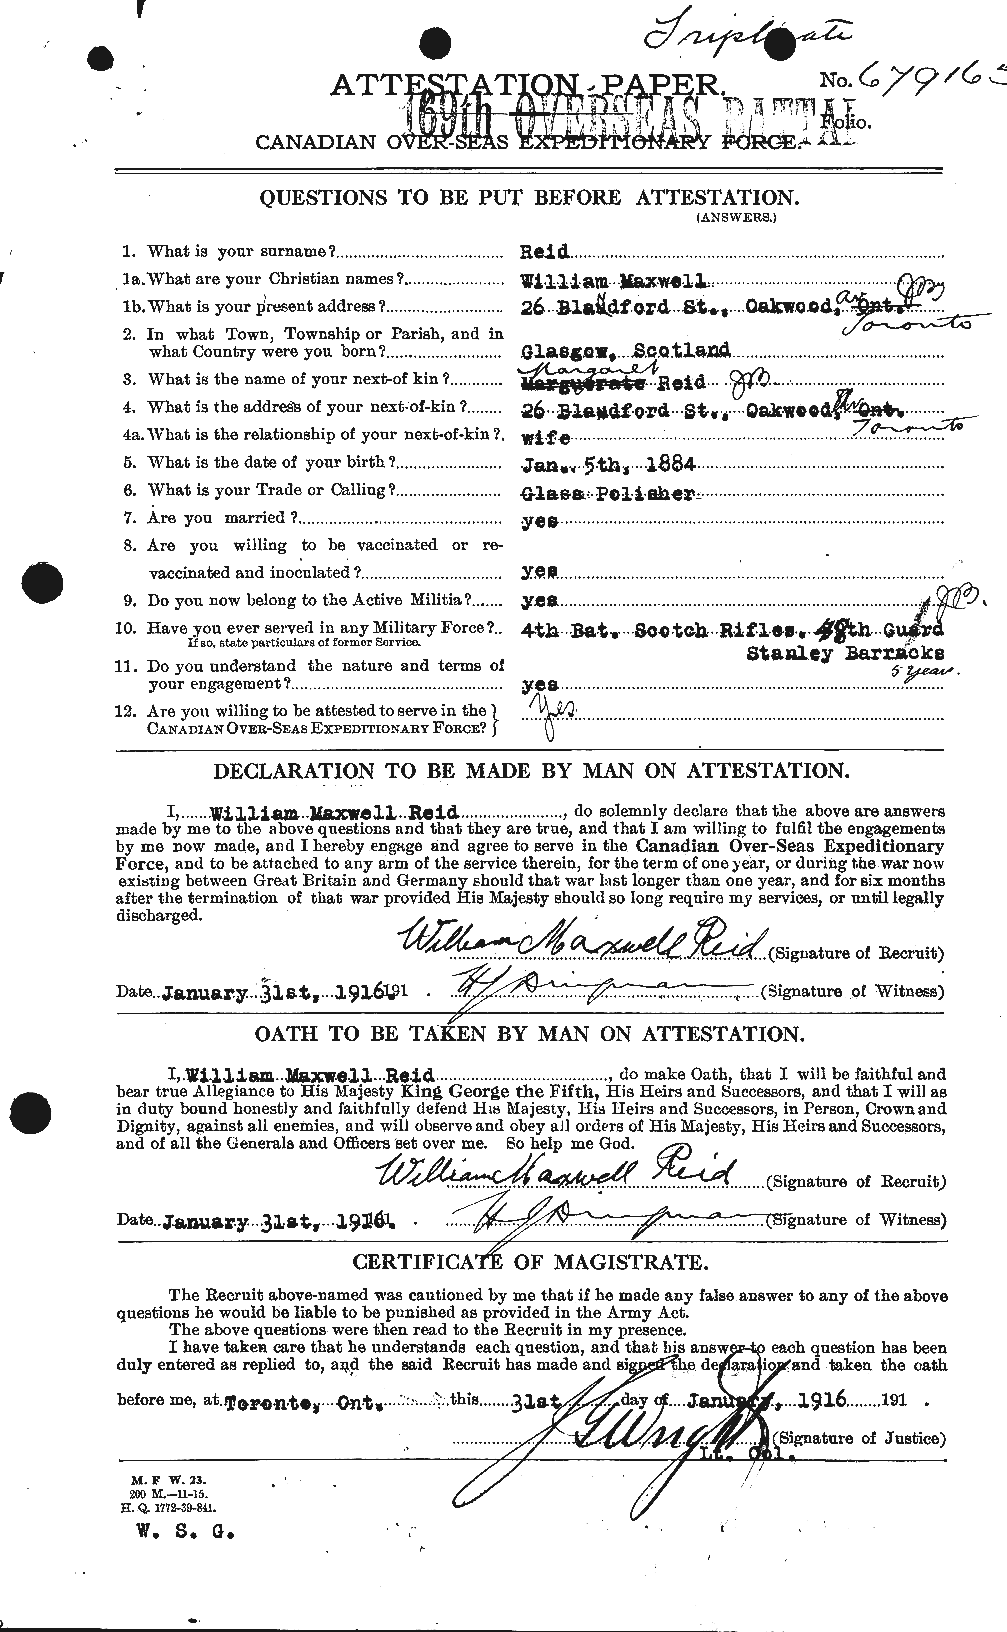 Personnel Records of the First World War - CEF 597025a